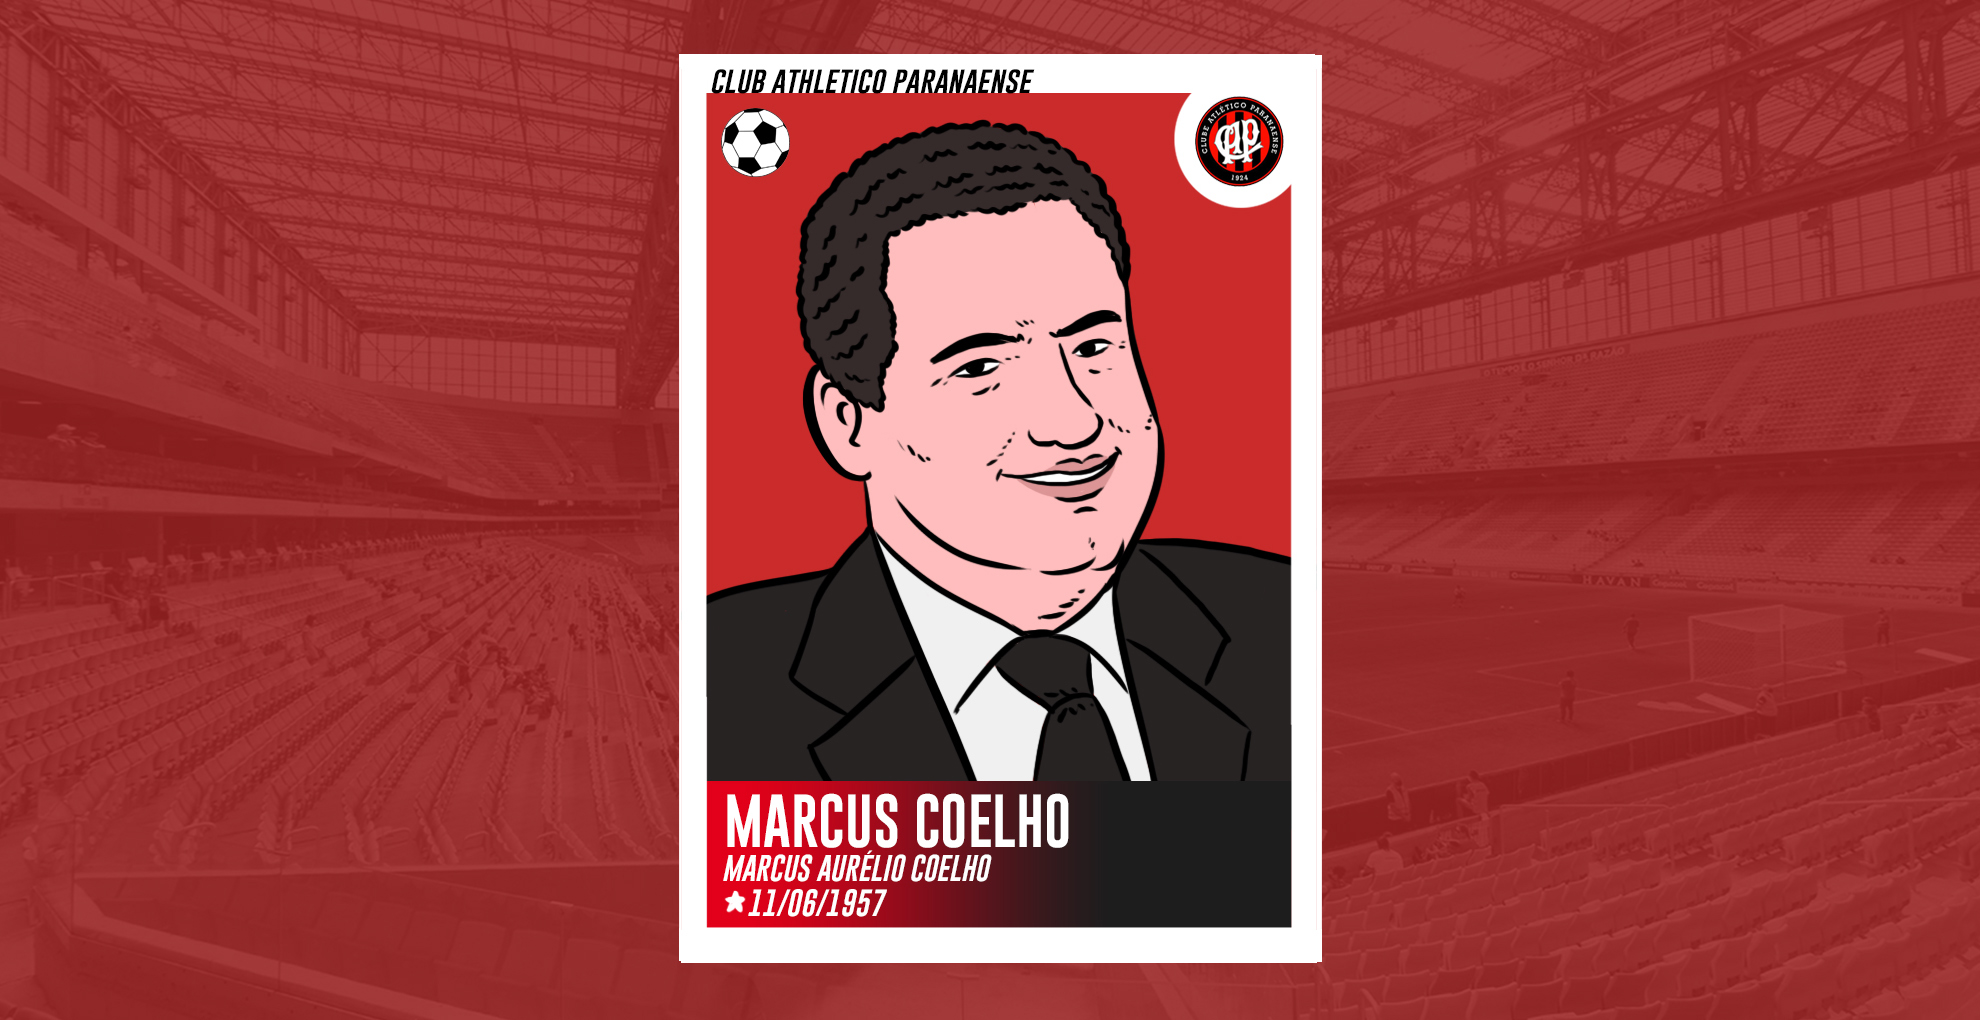 Athletico 100 years: Marcus Coelho, the president of the golden star